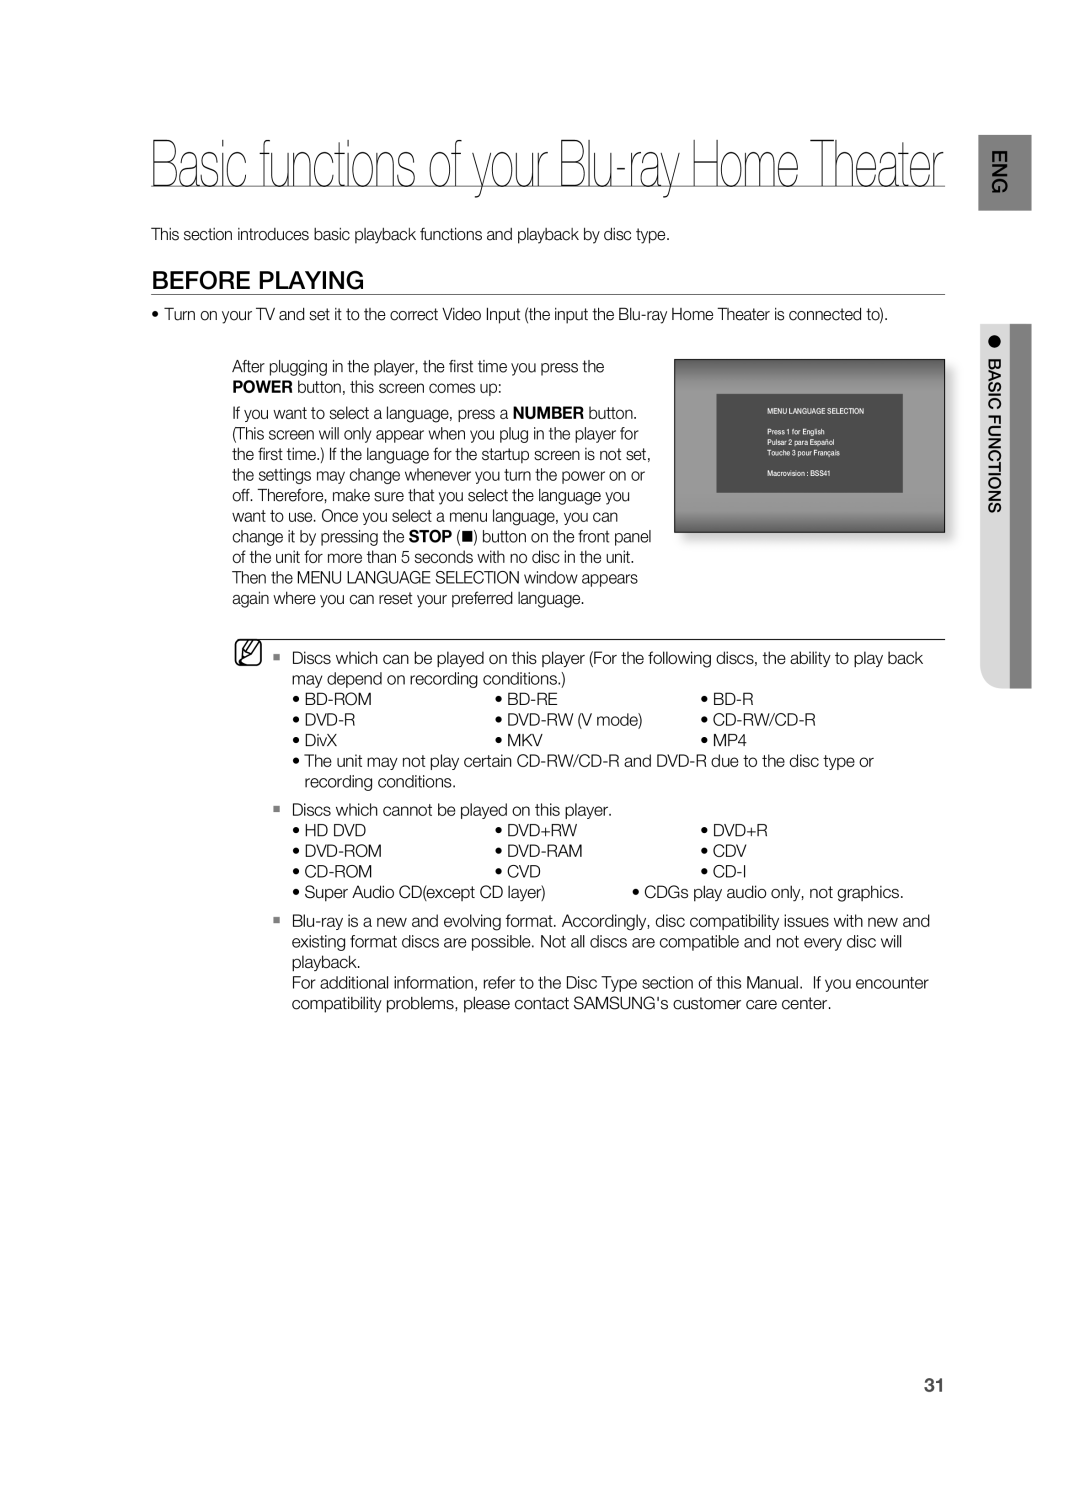 Samsung HT-BD8200 user manual Before Playing, Basic functions of your Blu-rayHome Theater 